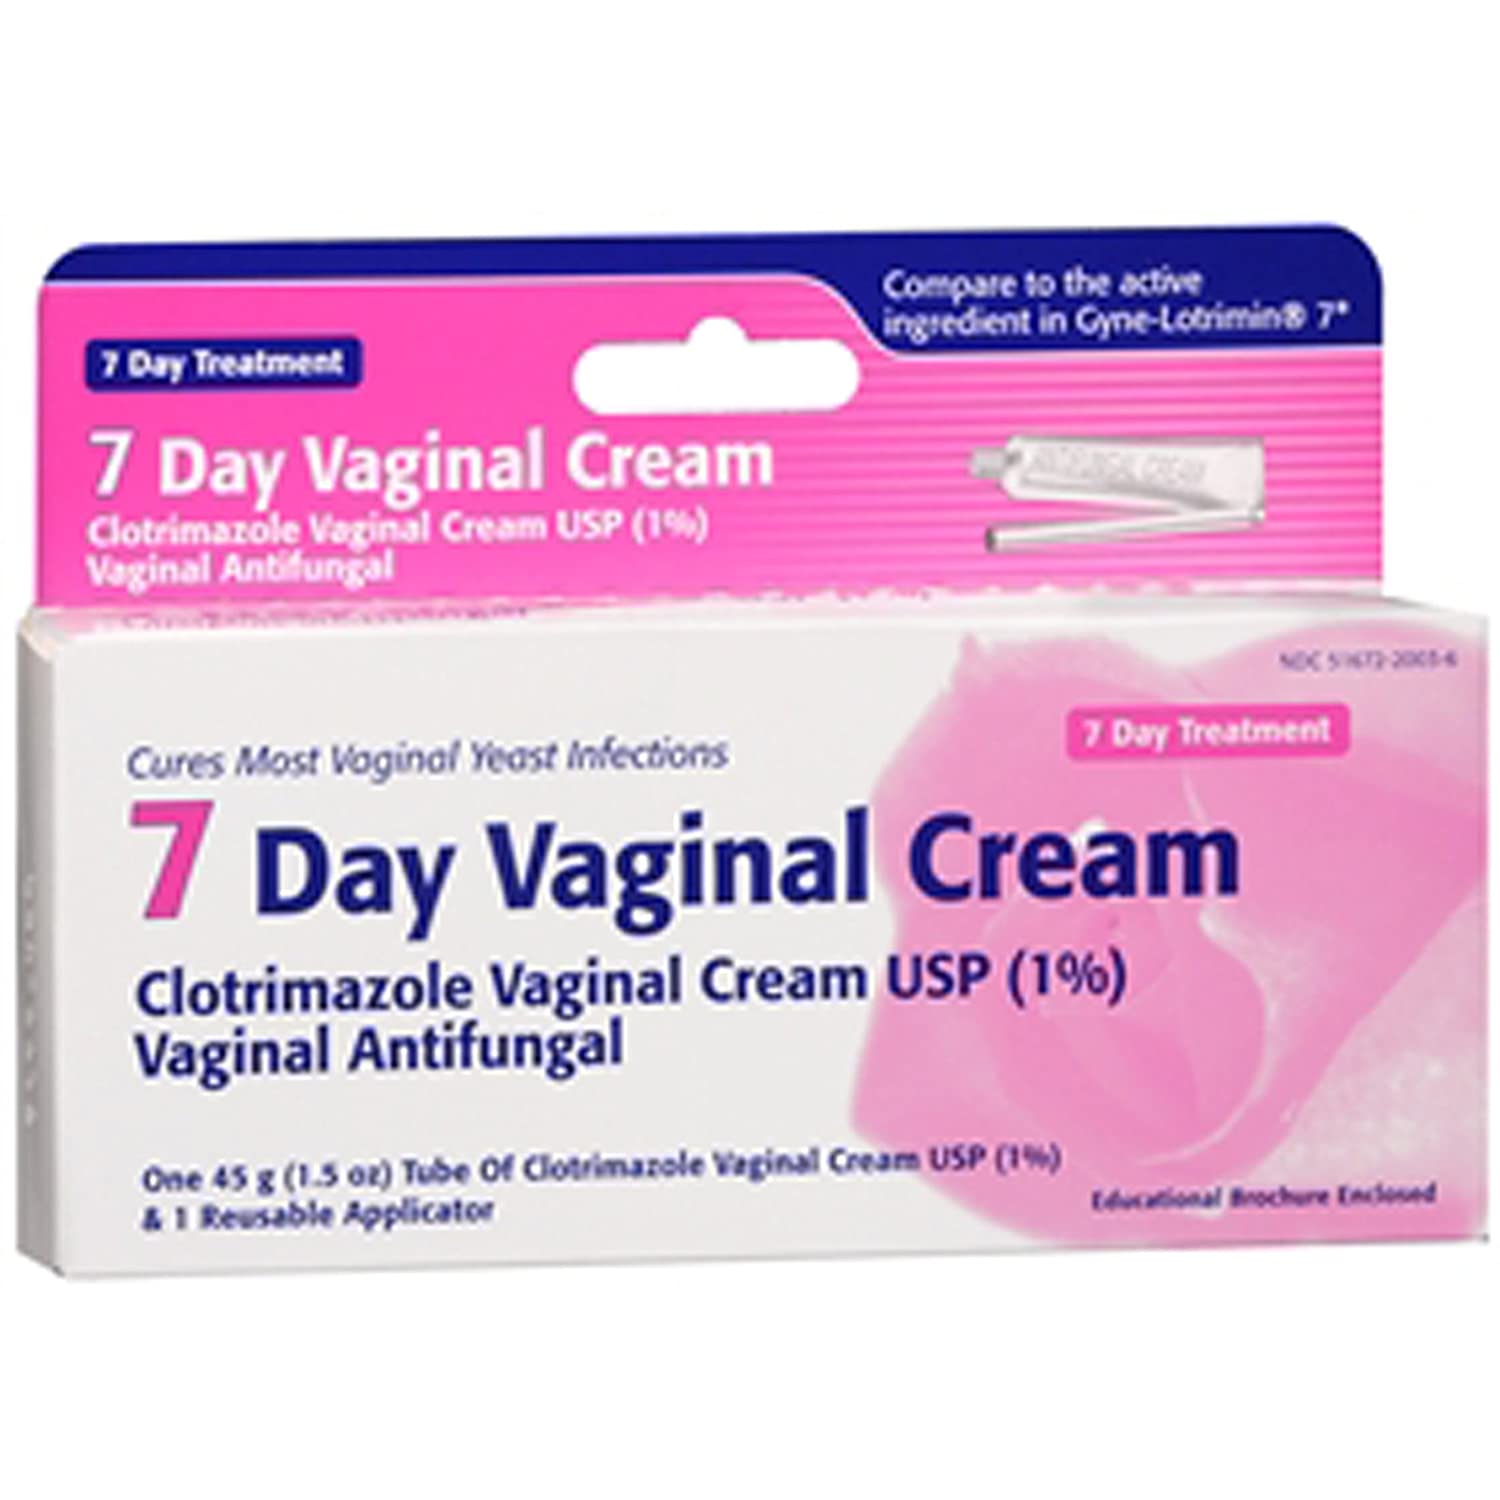 Yeast Infection Cream Reviews Guide